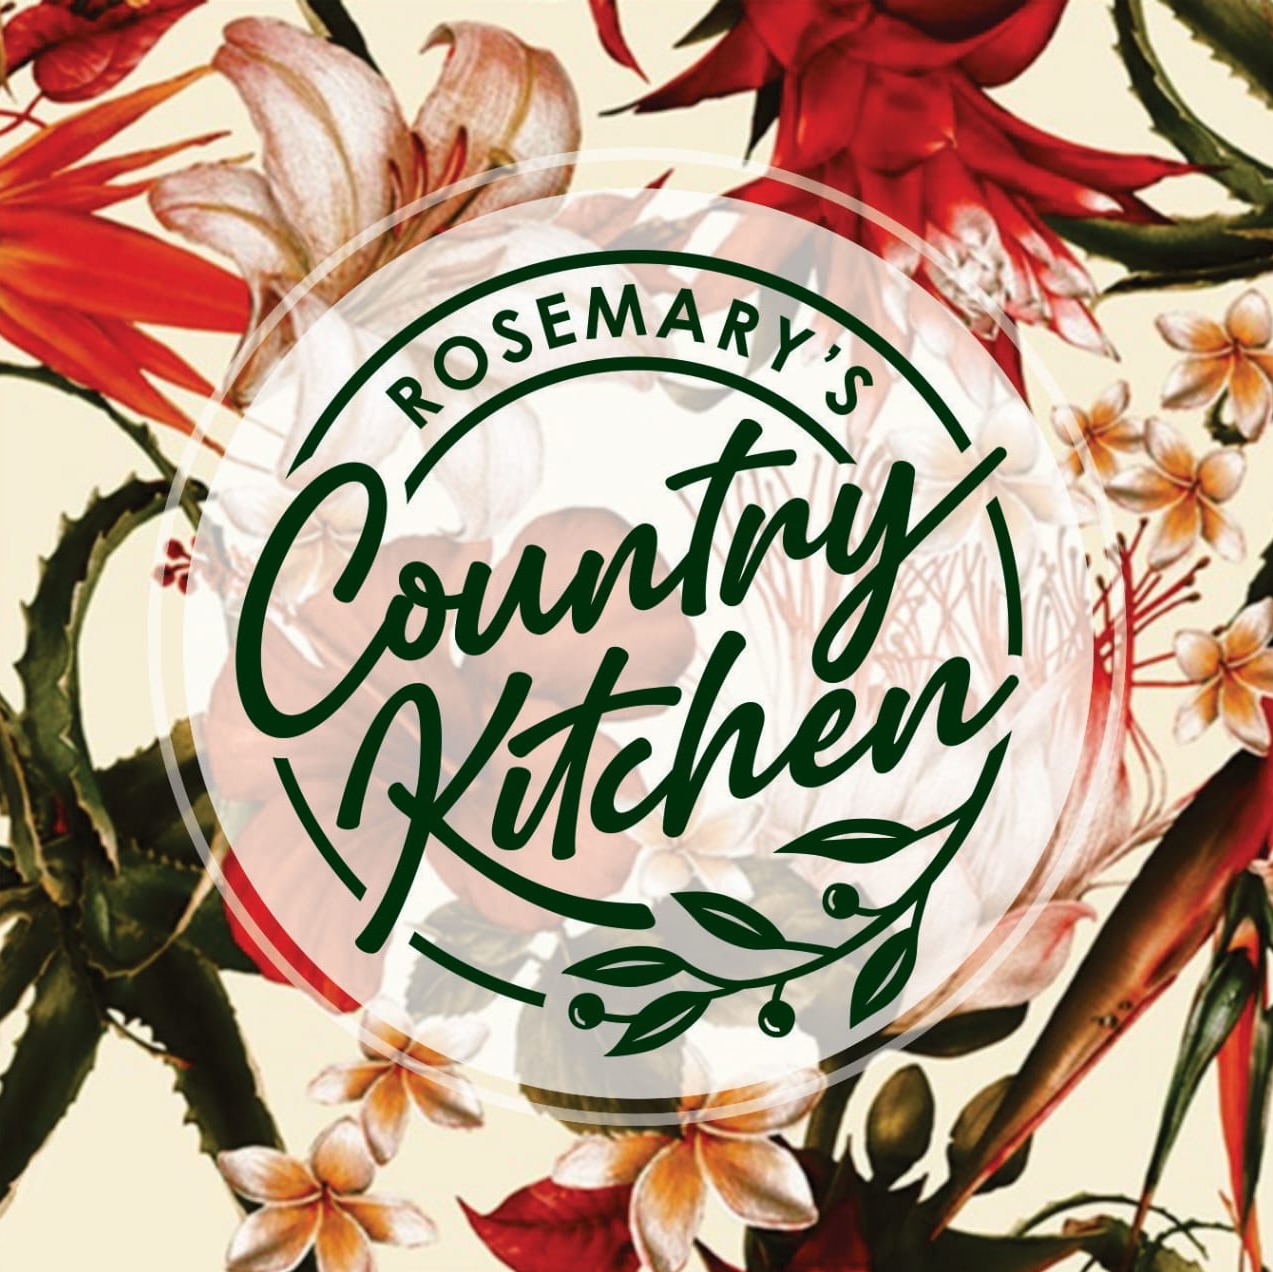 Rosemary's Country Kitchen